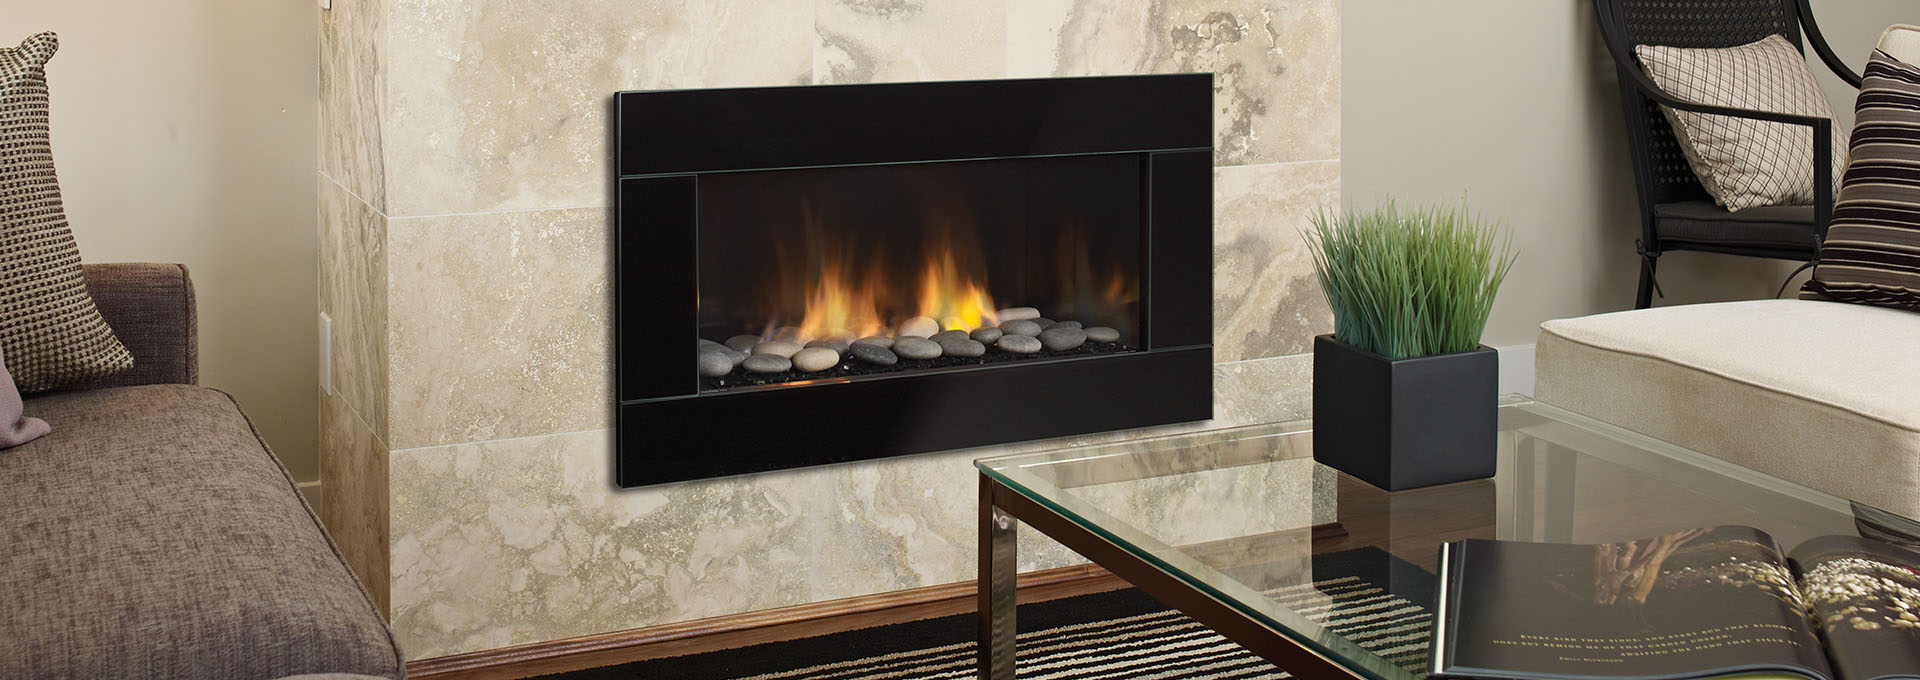 Double Sided Electric Fireplace Insert Best Of Fireplaces toronto Fireplace Repair & Maintenance